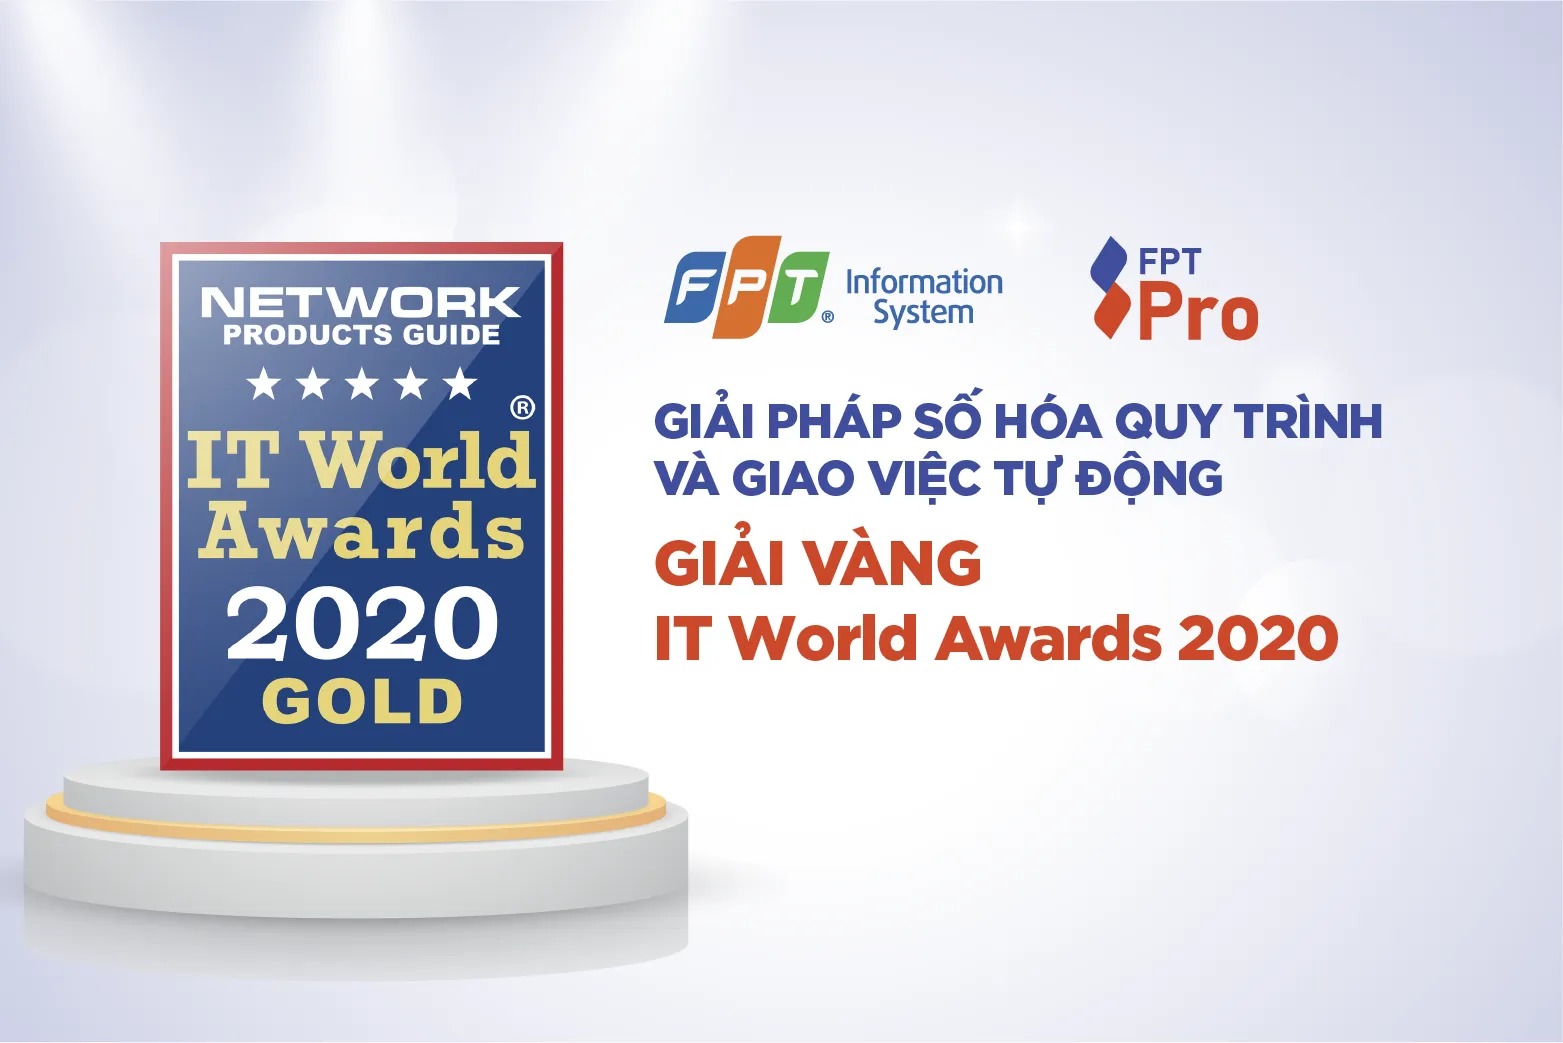 IT World Awards 2020 – Gold Award – Process Digitalization and Automatic Assignment Solution (FPT SPro)